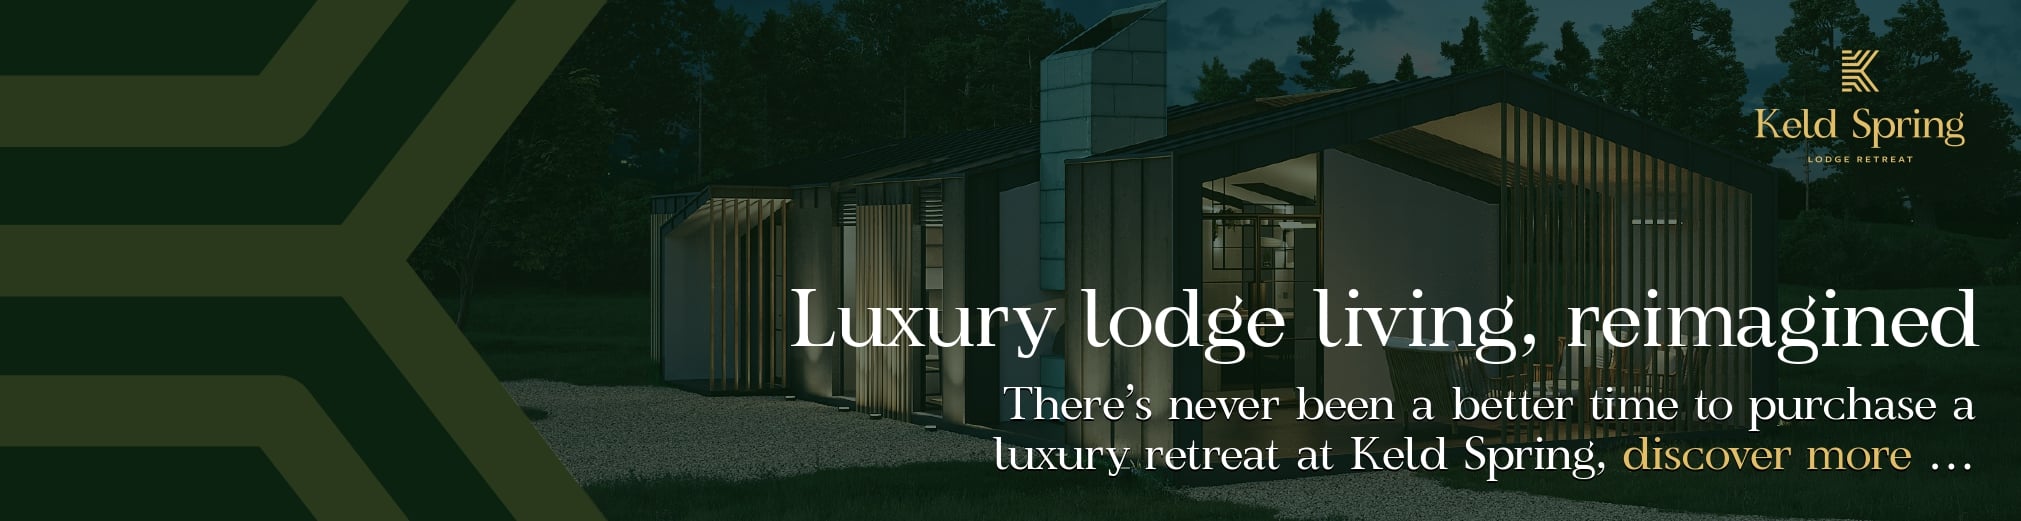 Lodges for sale in Yorkshire